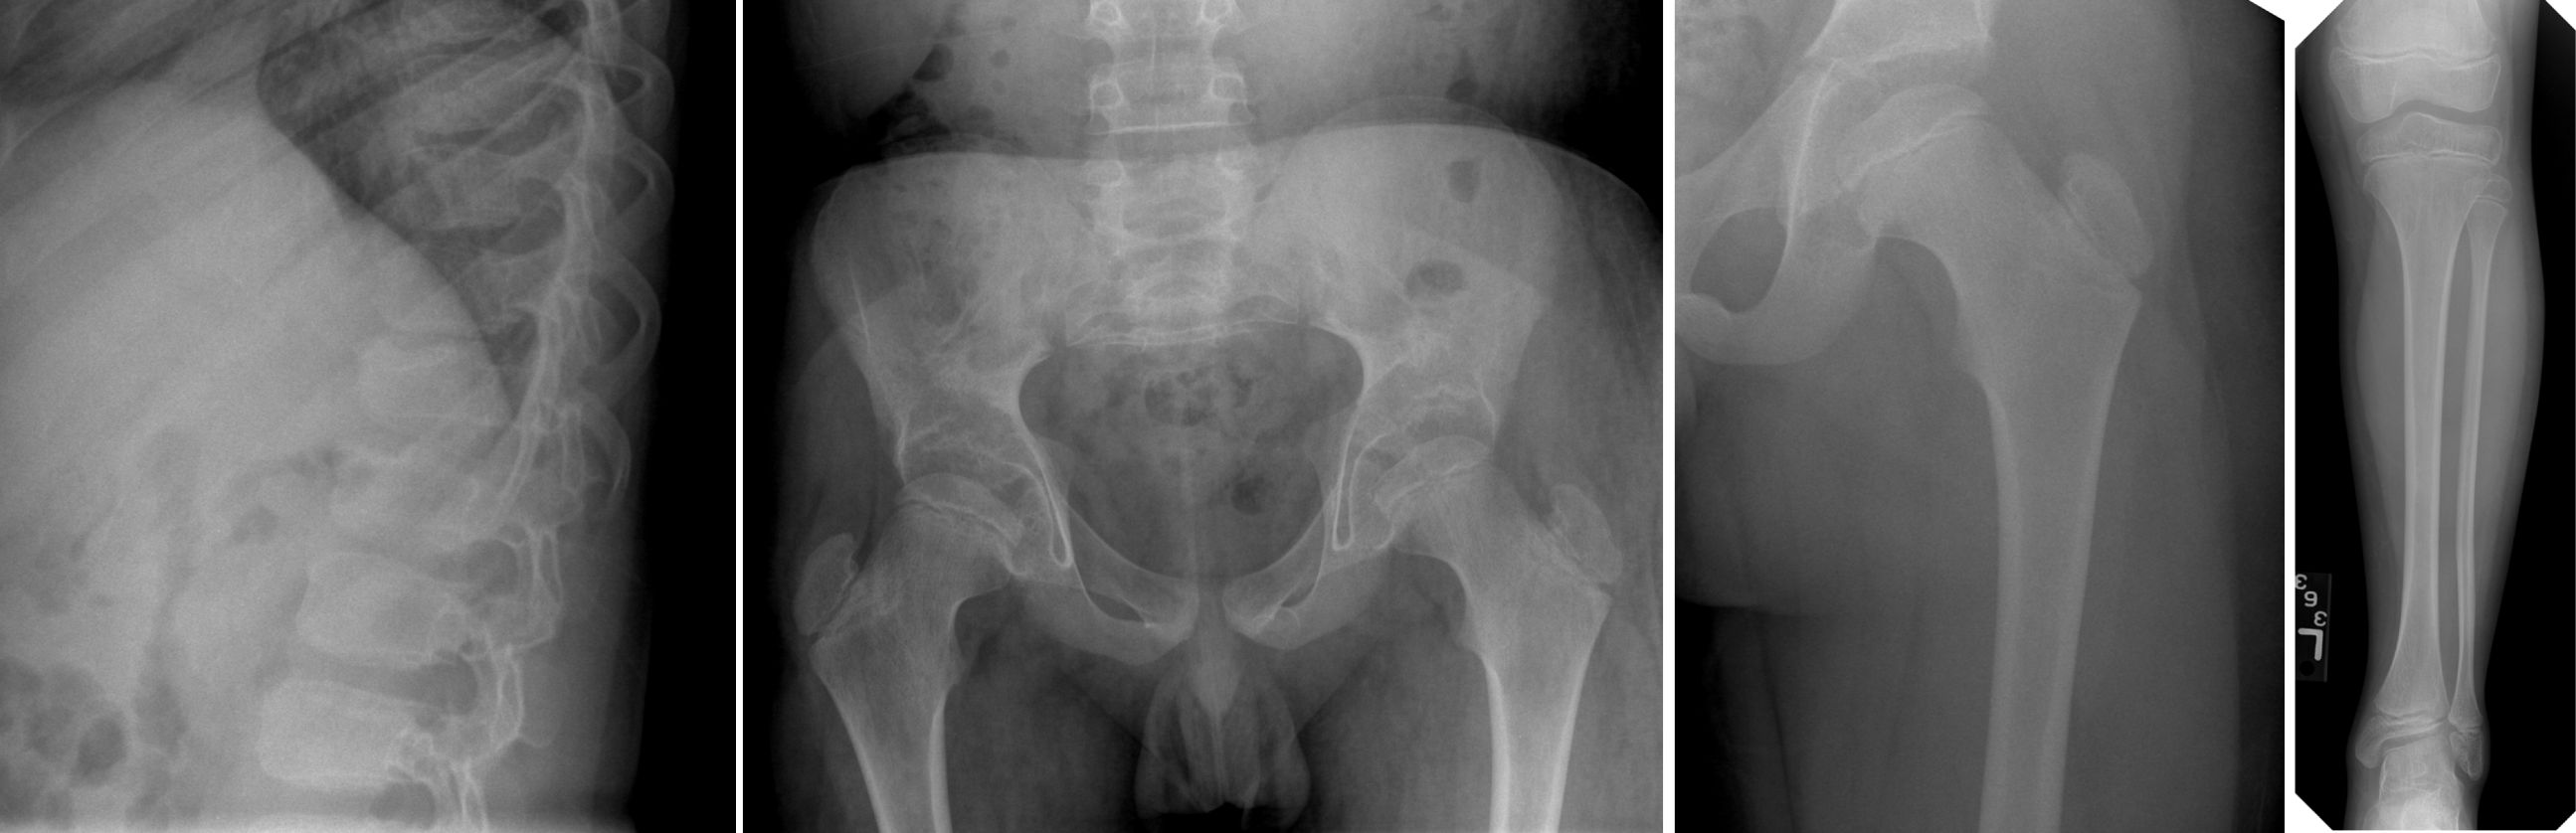 Figure 4. Stickler syndrome. small epiphyses, wide femoral neck, hypoplastic iliac wings, flat epiphyses, schmorl’s nodules.